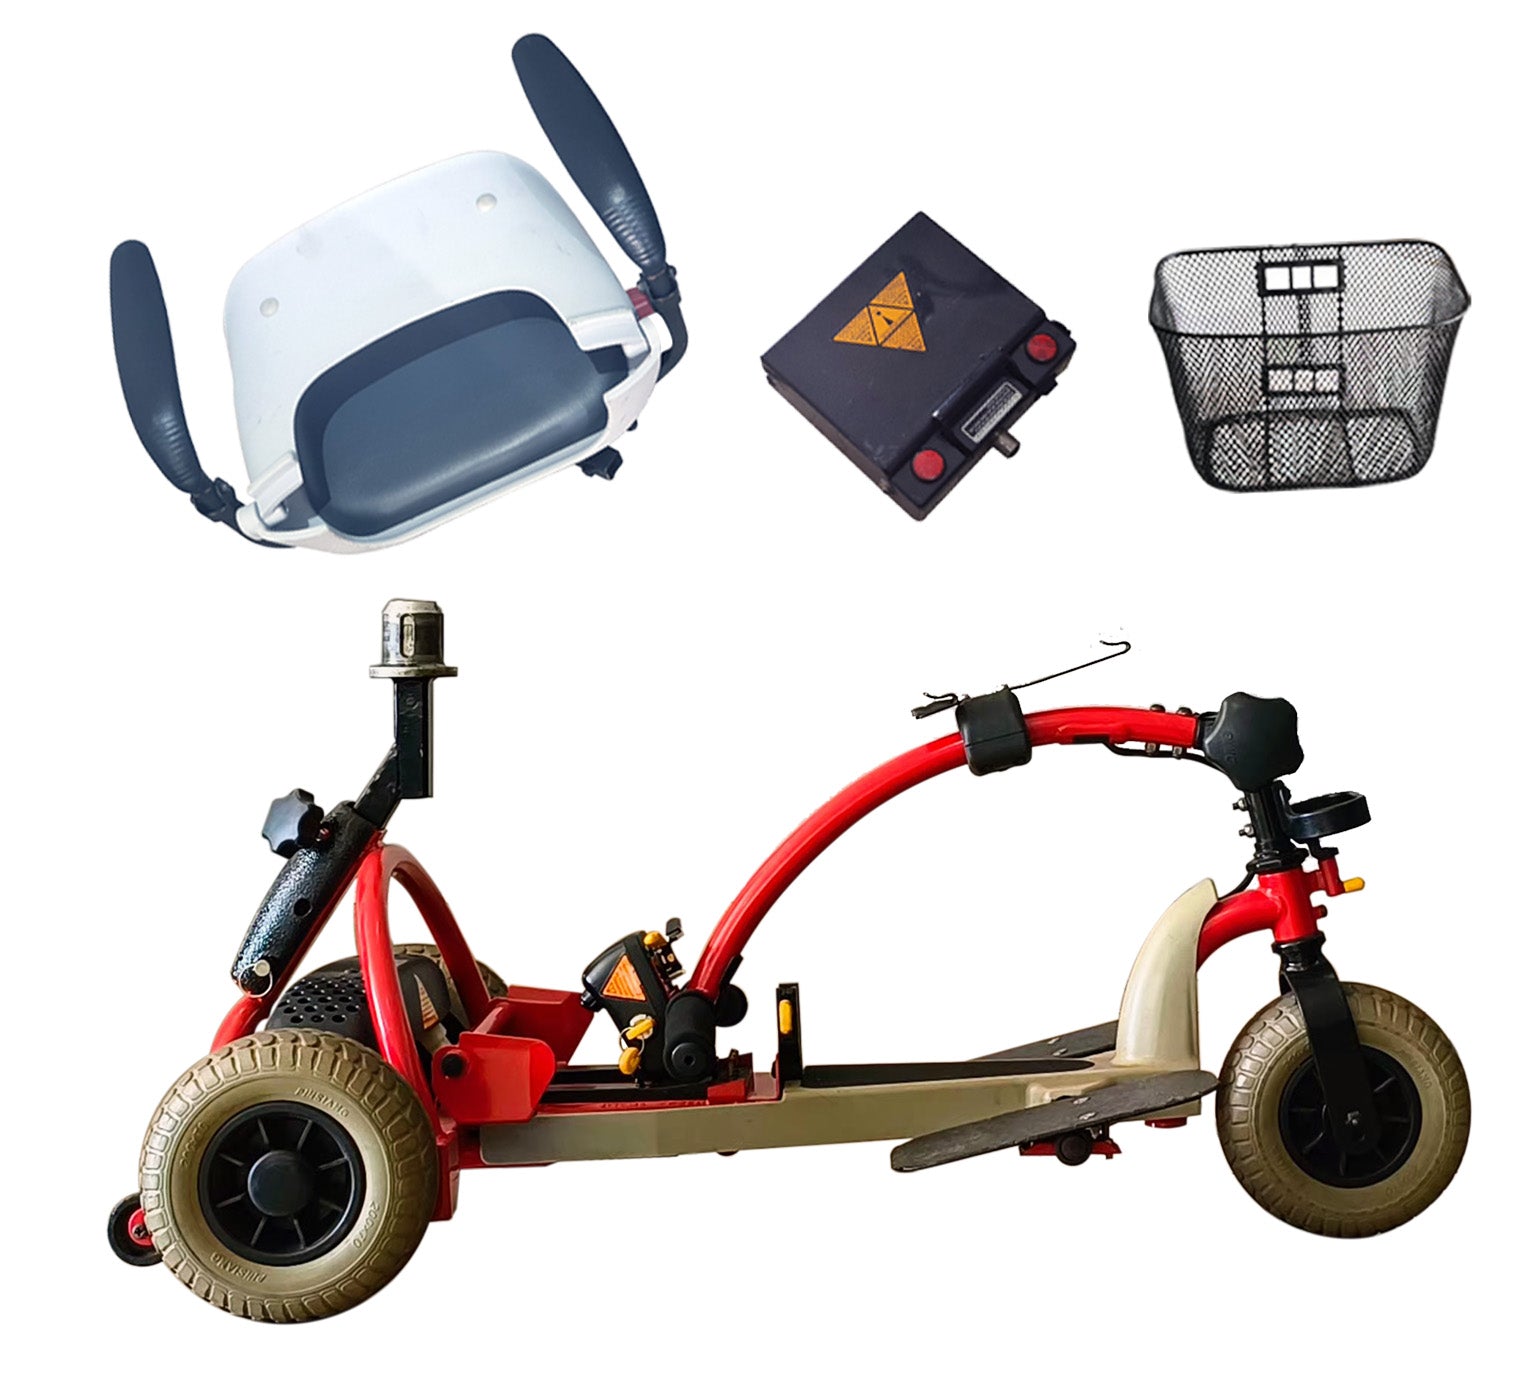 Shoprider TE787M Portable Scooter (Pre-Owned)